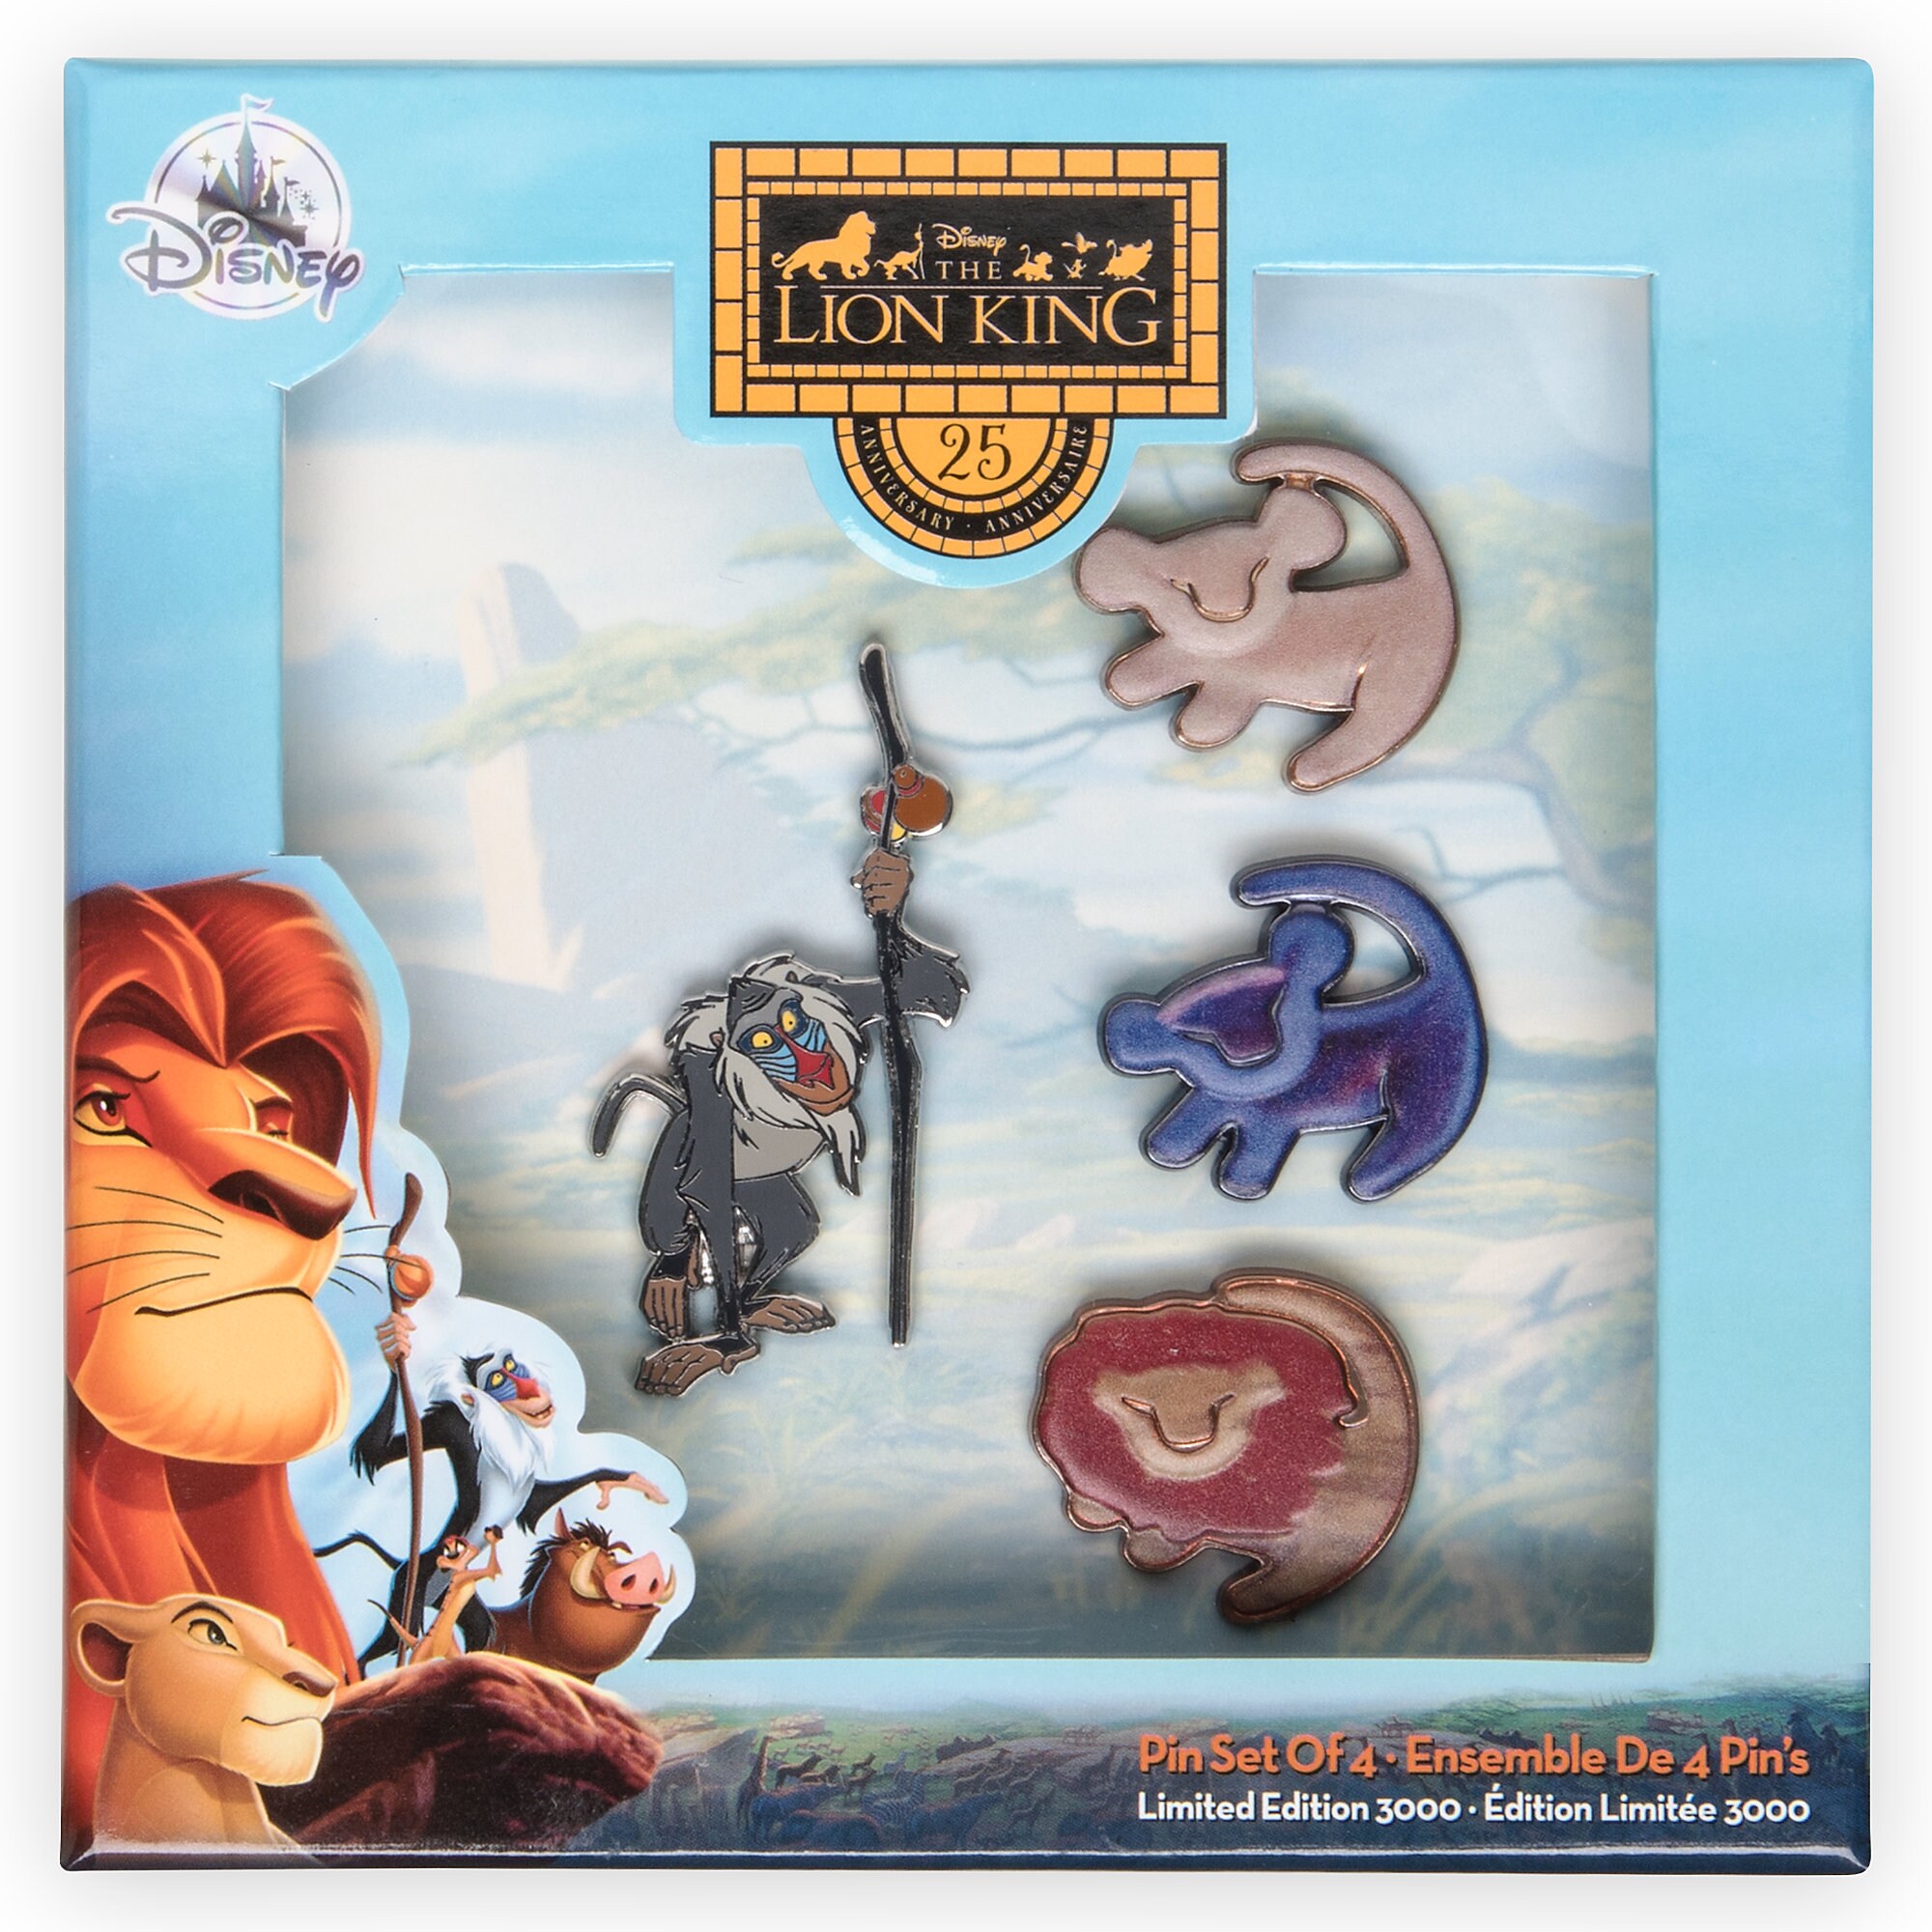 The Lion King 25th Anniversary Pin Set - Limited Edition